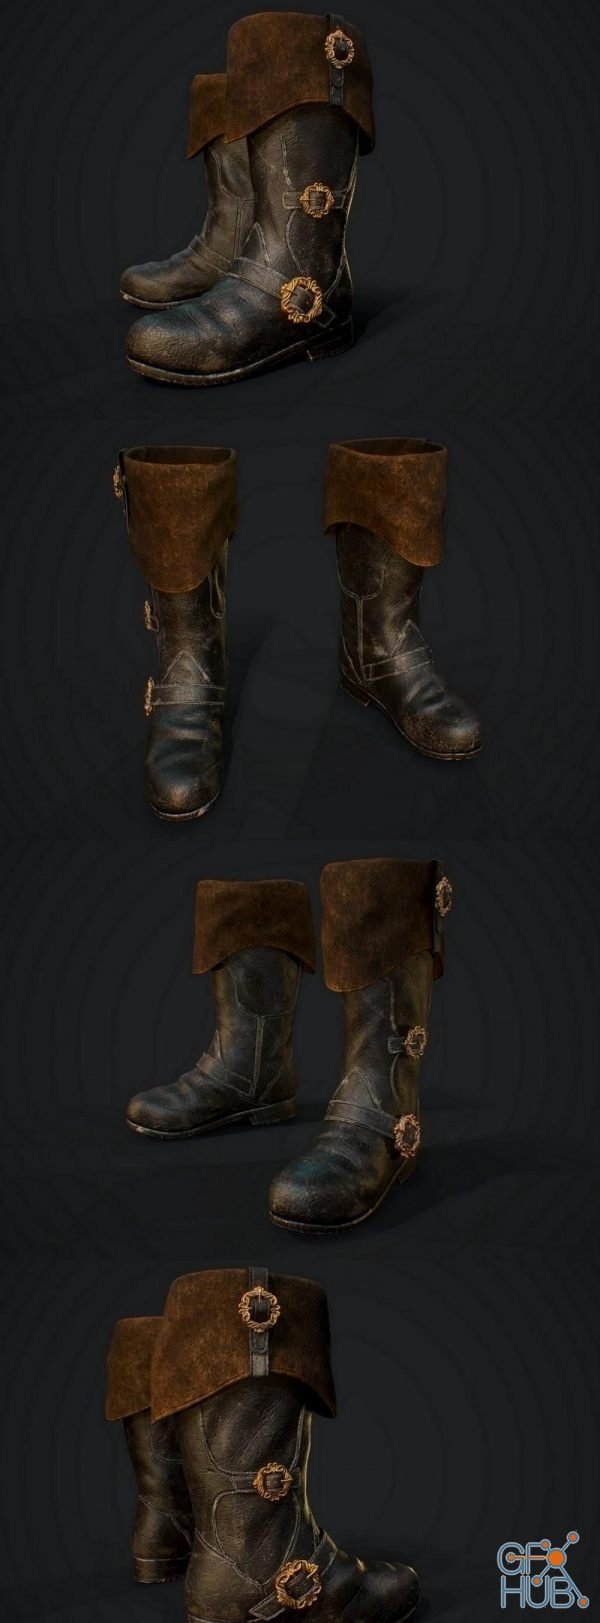 Pirate boots PBR